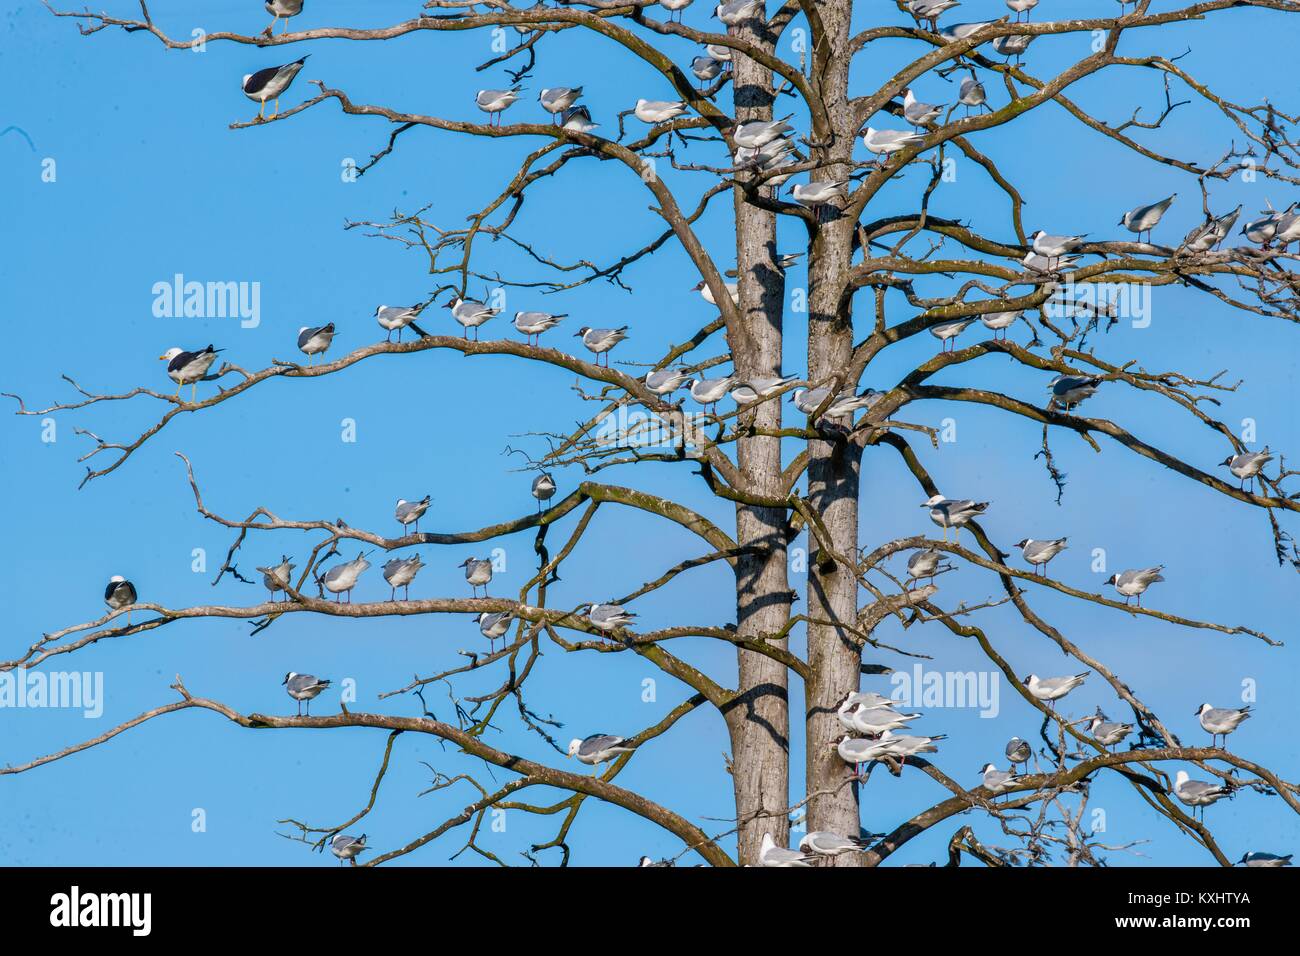 Seagulls on the spring tree. Natural blue sky background Stock Photo